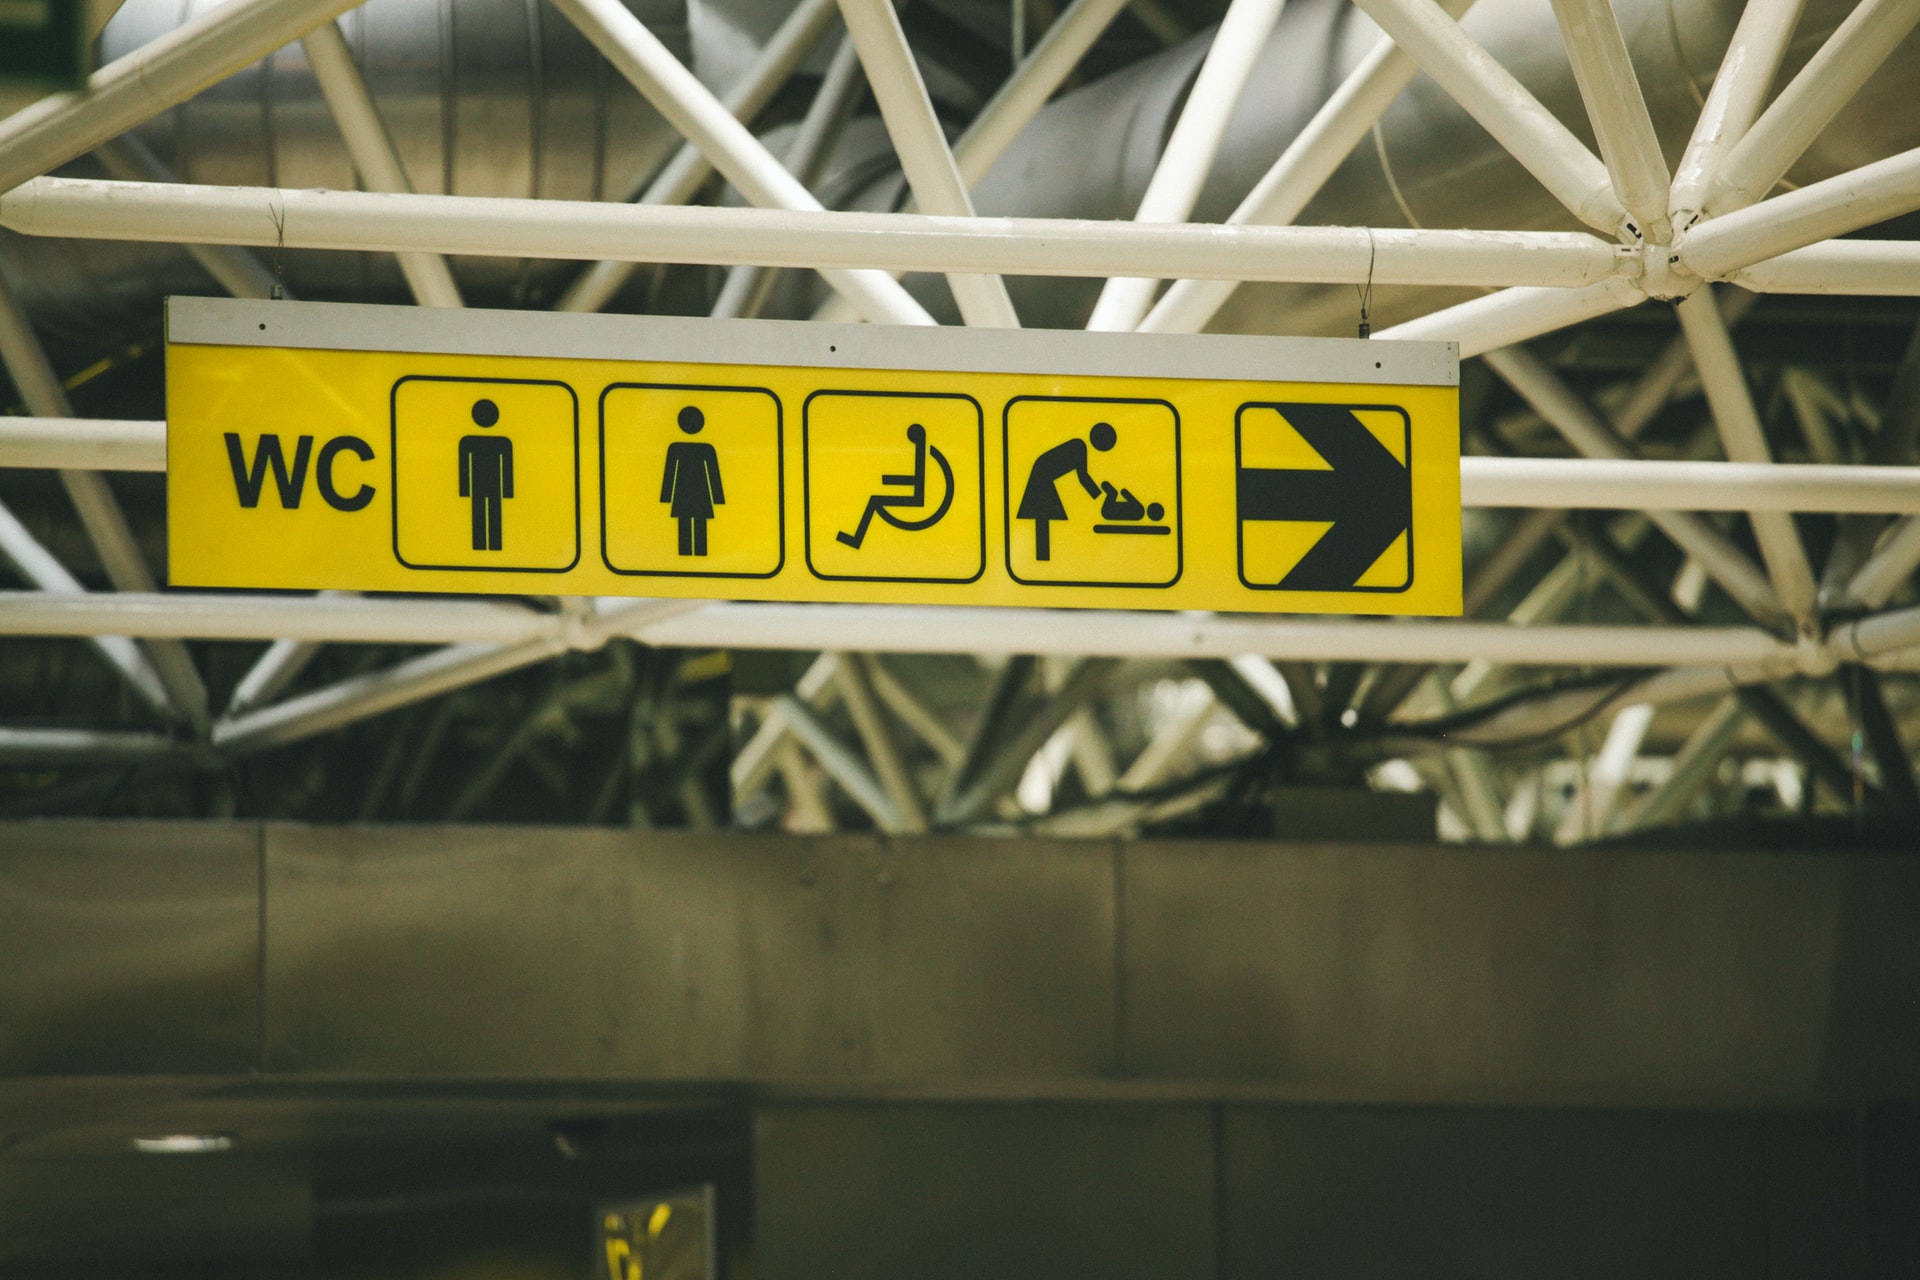 A photograph of a yellow toilet signs in an airport.